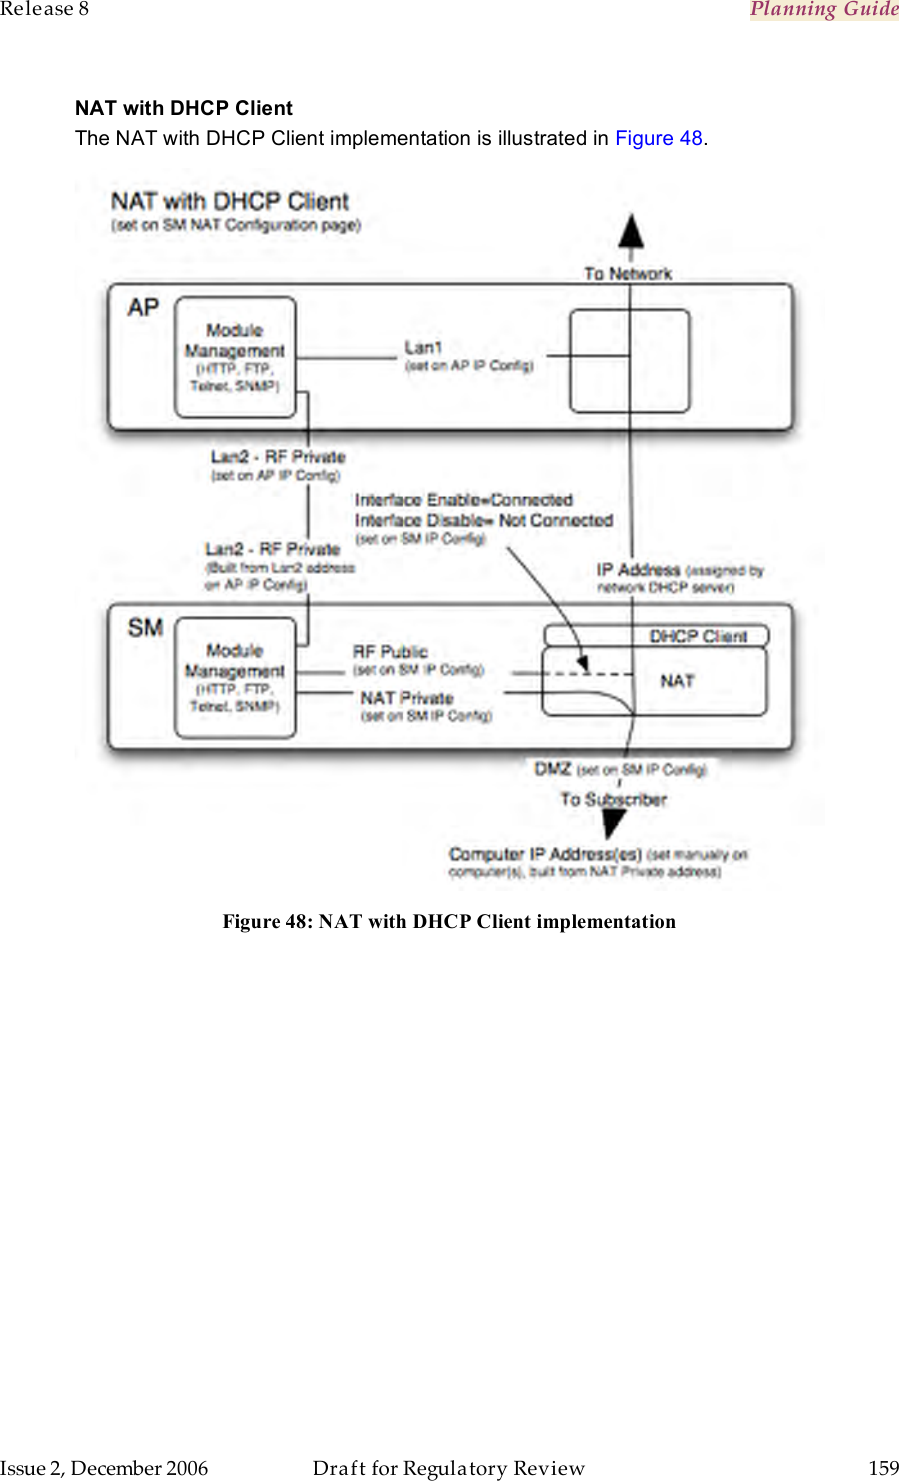 Release 8    Planning Guide                  March 200                  Through Software Release 6.   Issue 2, December 2006  Draft for Regulatory Review  159     NAT with DHCP Client The NAT with DHCP Client implementation is illustrated in Figure 48.  Figure 48: NAT with DHCP Client implementation 